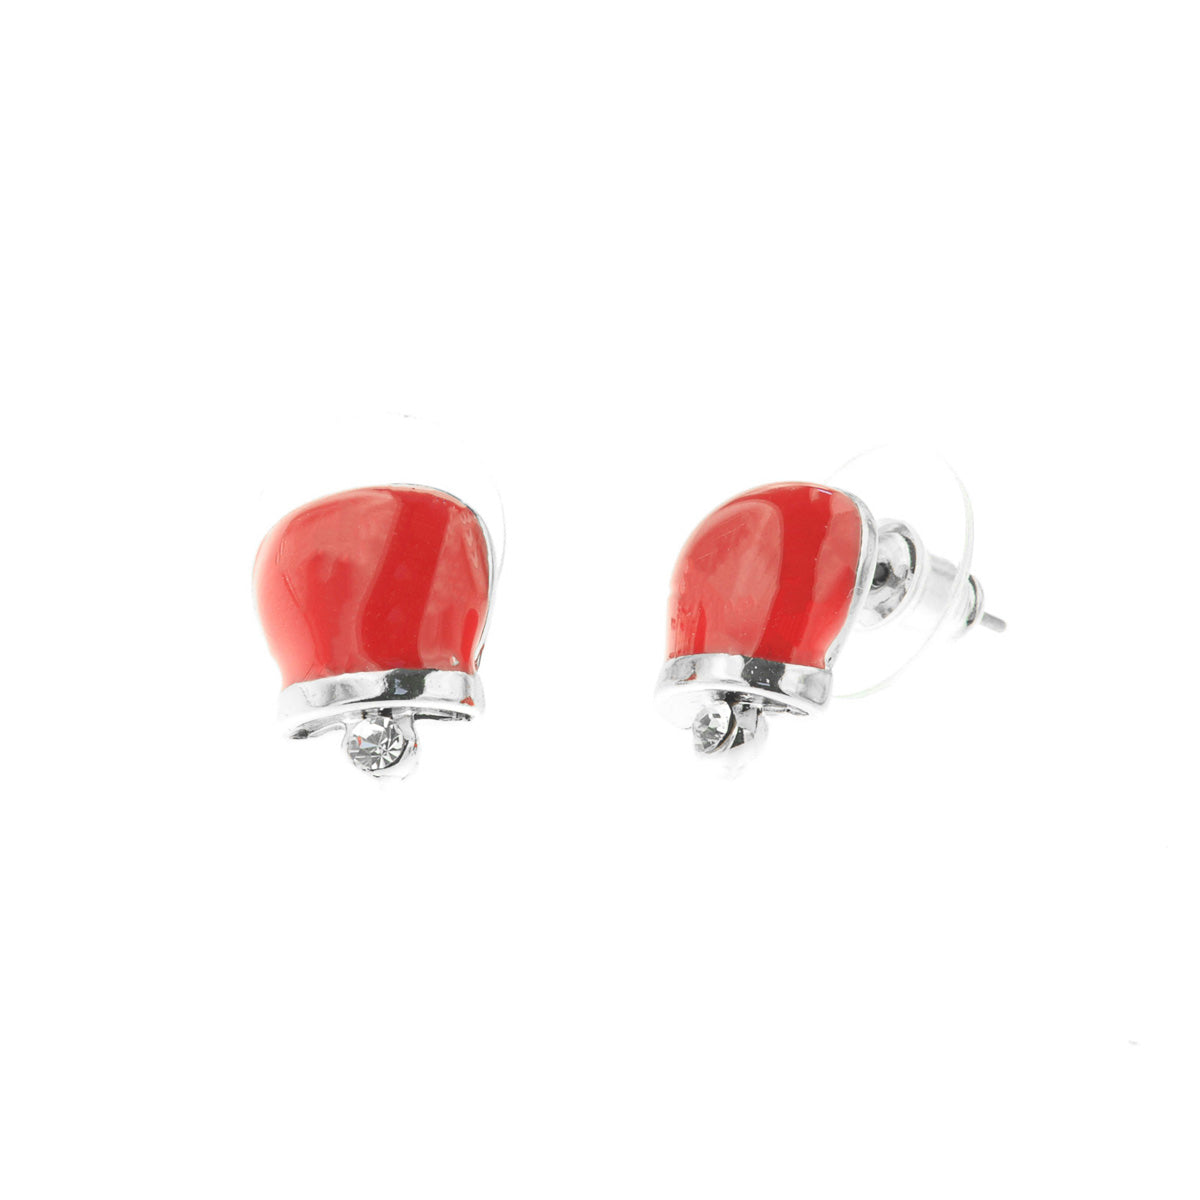 Metal earrings in the shape of a charming bell with red glazes and crystals